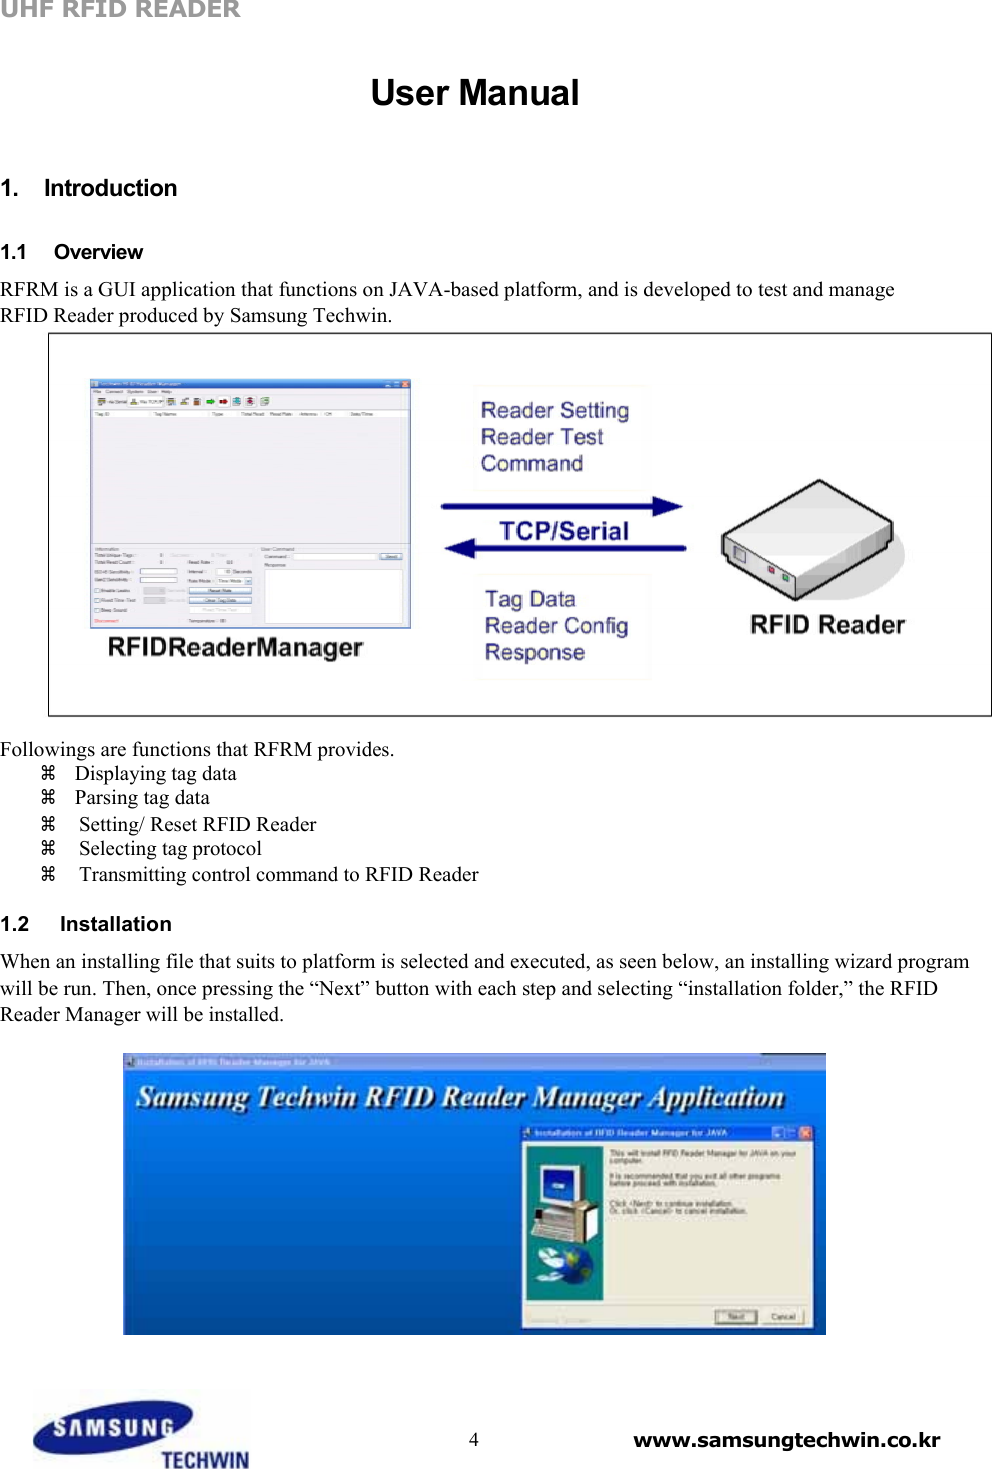 UHF RFID READER    User Manual    1.  Introduction   1.1   Overview  RFRM is a GUI application that functions on JAVA-based platform, and is developed to test and manage RFID Reader produced by Samsung Techwin.    Followings are functions that RFRM provides.    Displaying tag data    Parsing tag data  Setting/ Reset RFID Reader    Selecting tag protocol   Transmitting control command to RFID Reader   1.2   Installation  When an installing file that suits to platform is selected and executed, as seen below, an installing wizard program will be run. Then, once pressing the “Next” button with each step and selecting “installation folder,” the RFID Reader Manager will be installed.        4 www.samsungtechwin.co.kr 